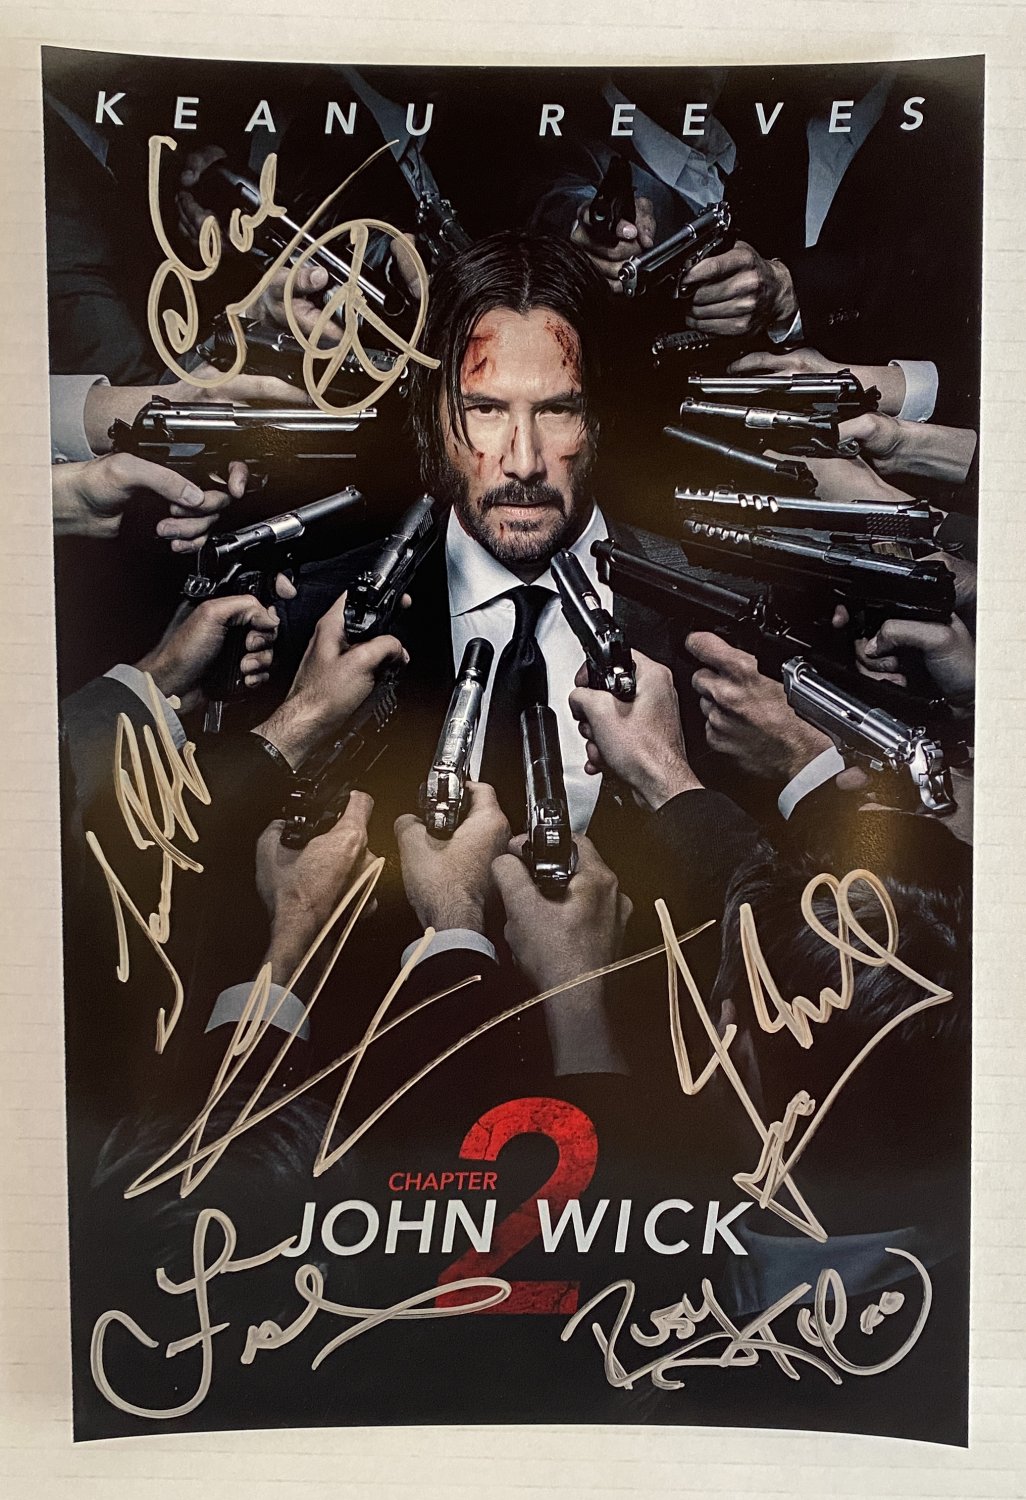 John Wick Chapter 2 cast signed autographed 8x12 photo Keanu Reeves photograph